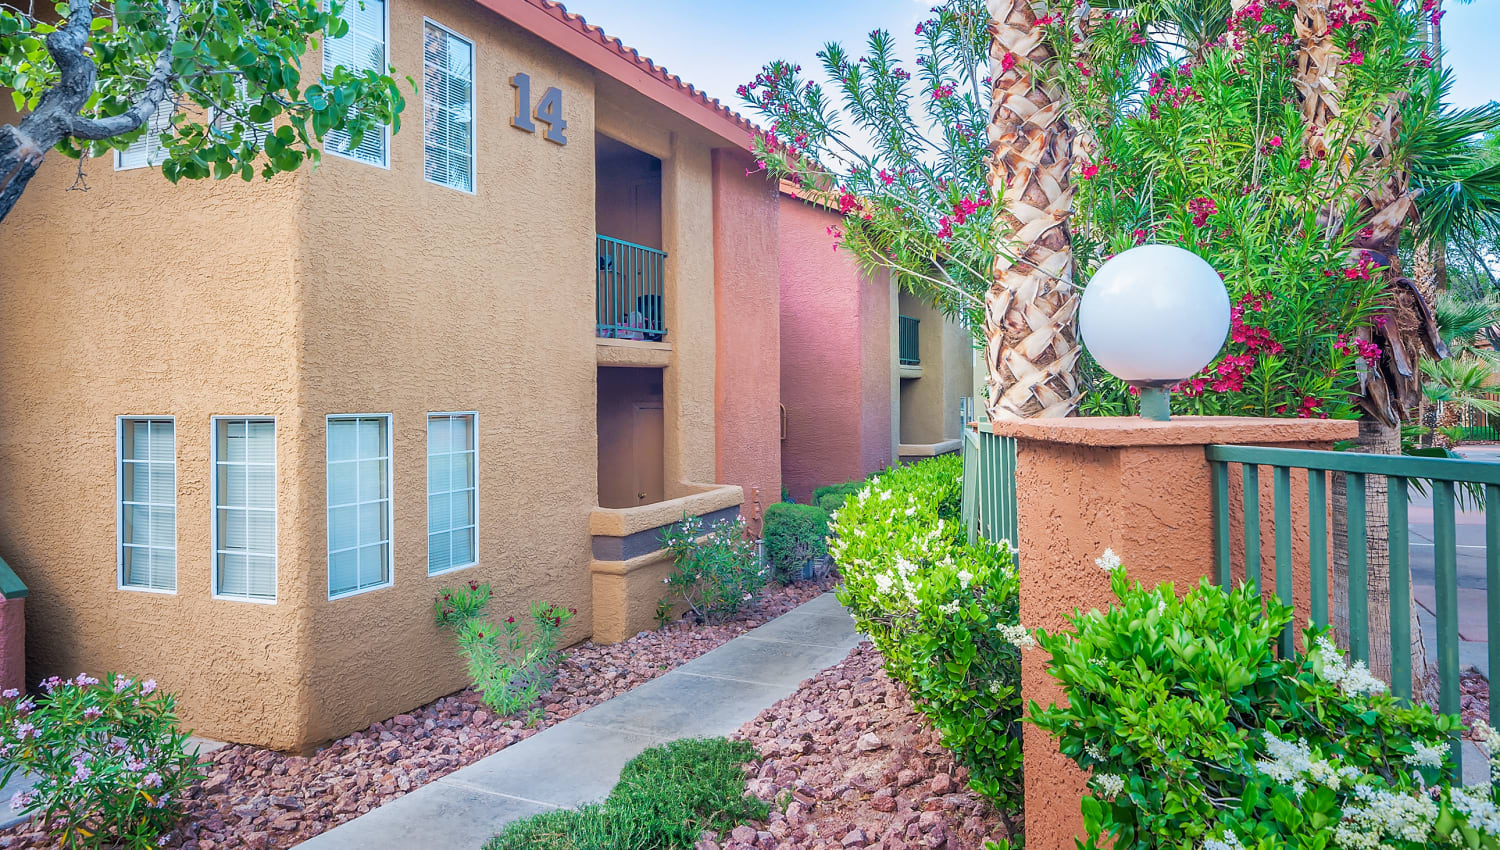 Exterior of apartments and walkway view at Invitational Apartments in Henderson, Nevada